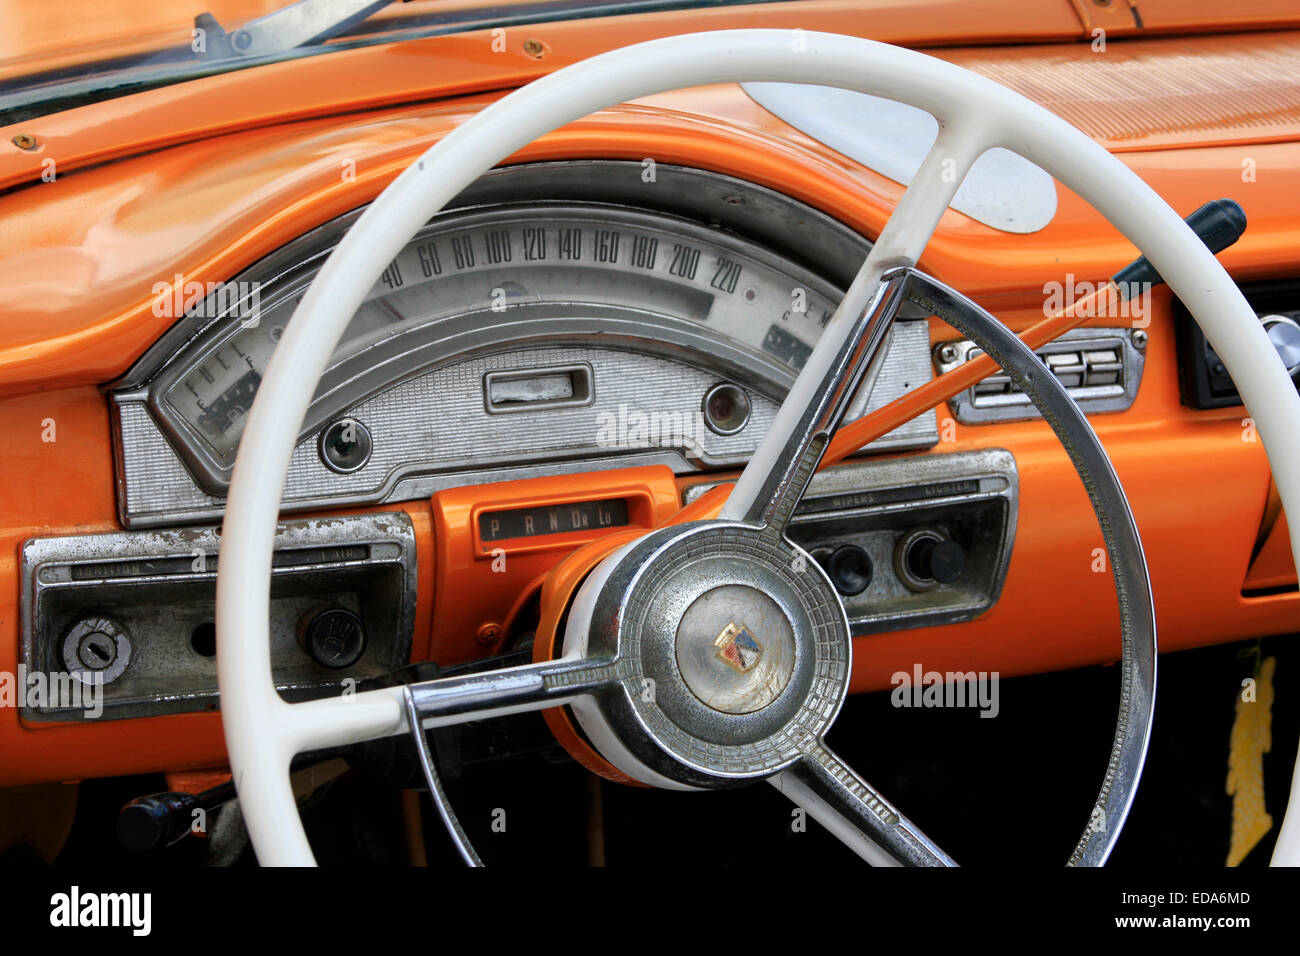 Steering wheel and dashboard of a vintage Ford Fairlane in Havana, Cuba Stock Photo